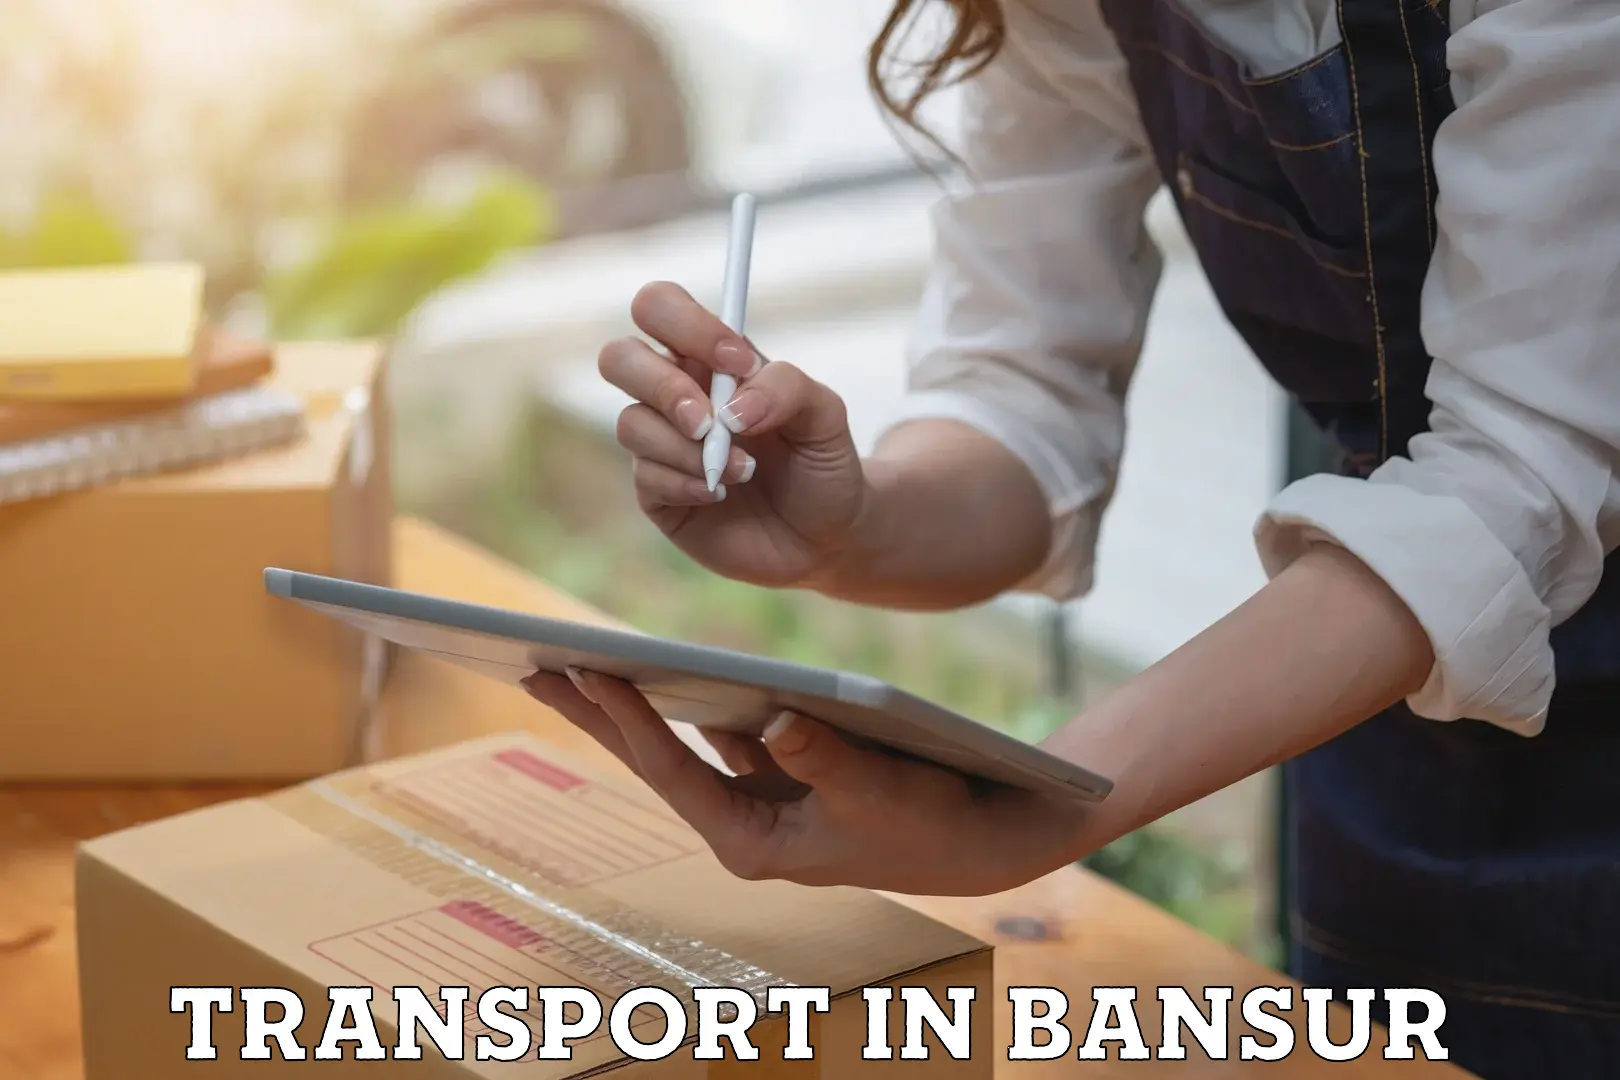 Transport shared services in Bansur